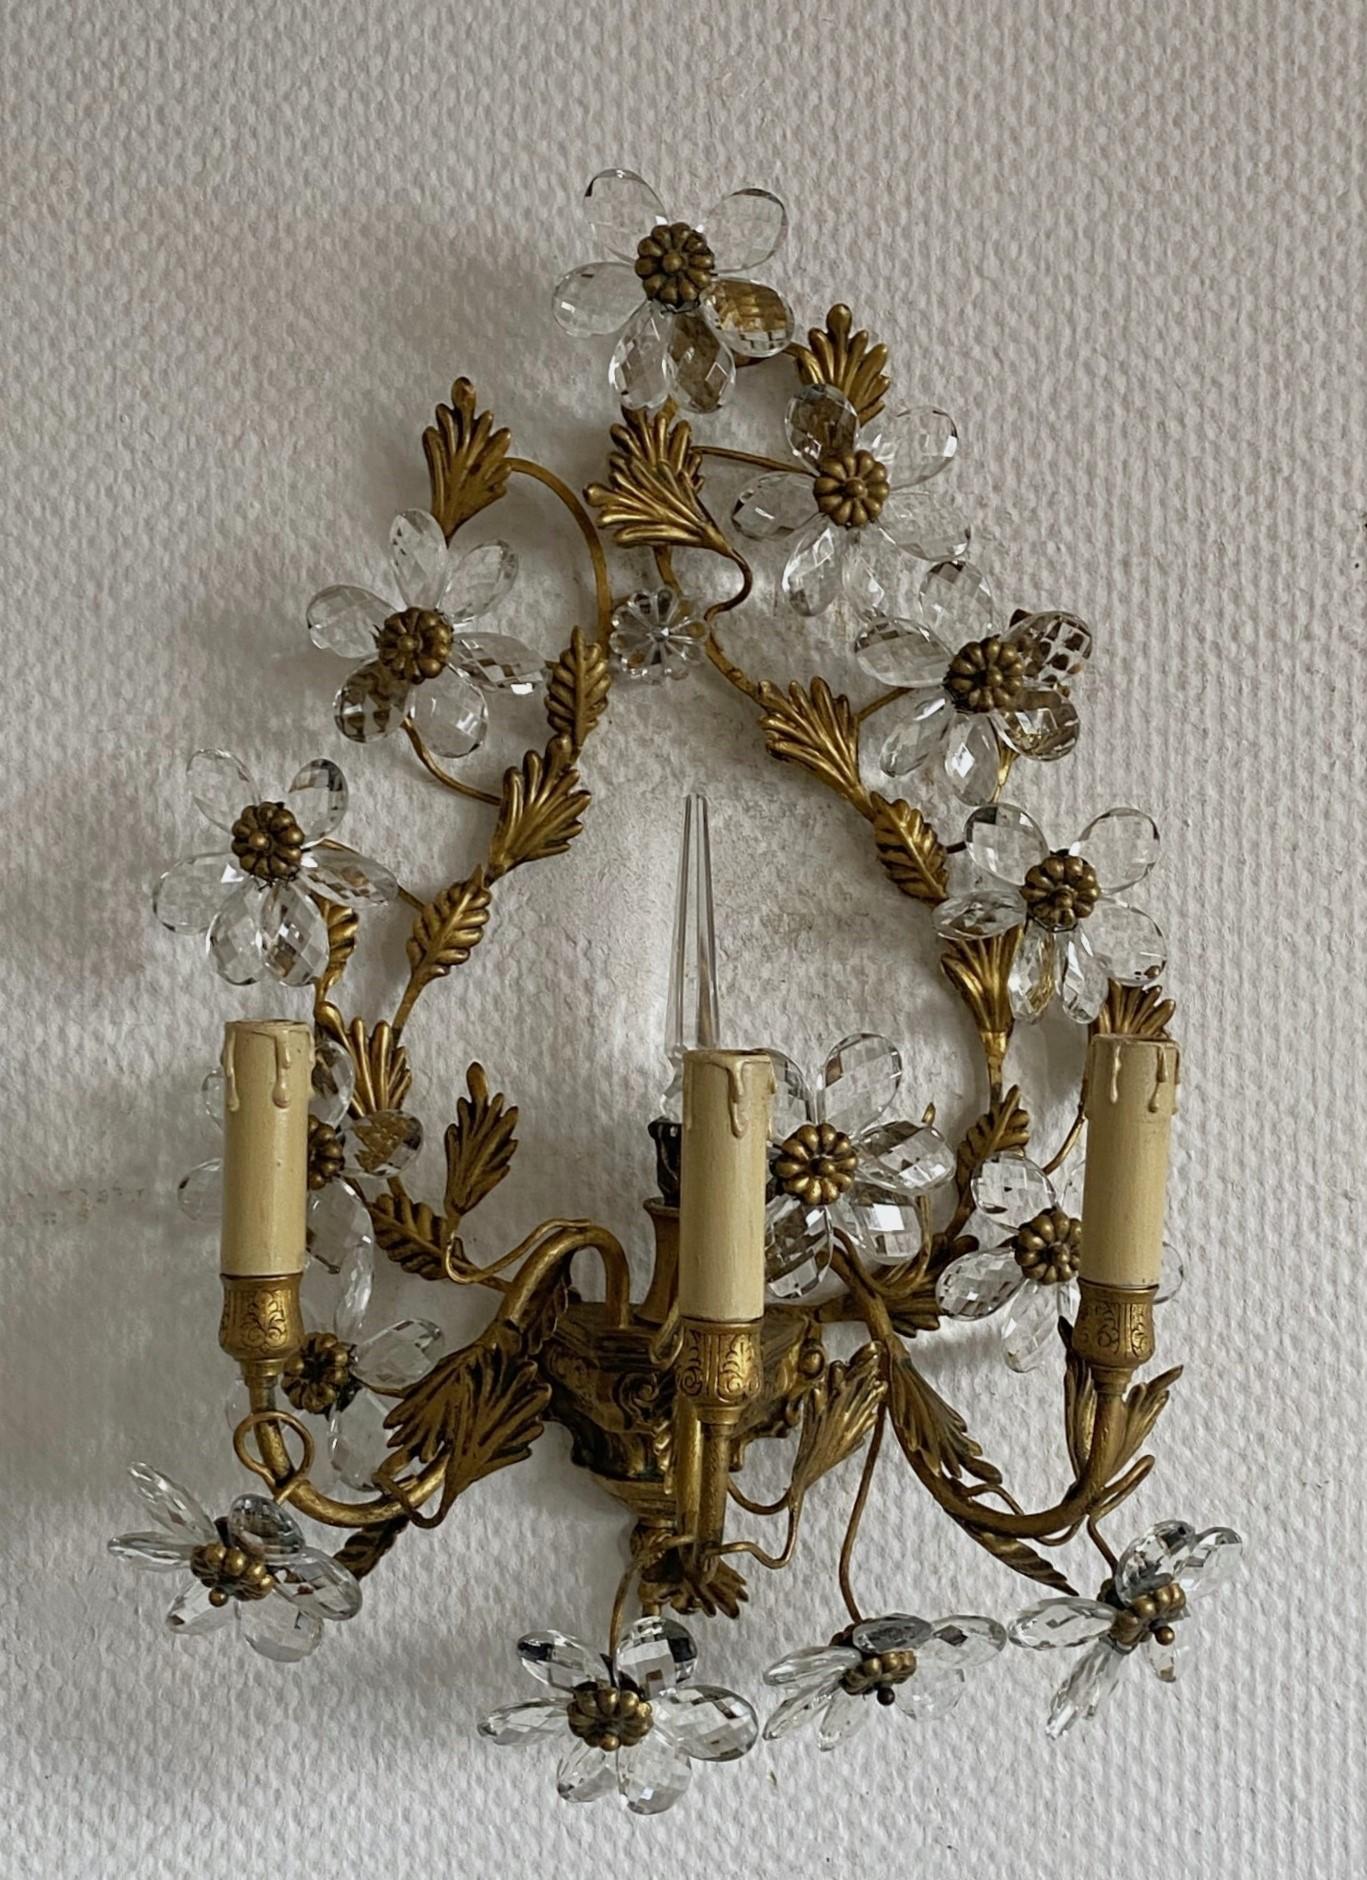 Pair of Large Maison Baguès Wrought Iron Crystal Flower Wall Sconces, 1930s For Sale 6